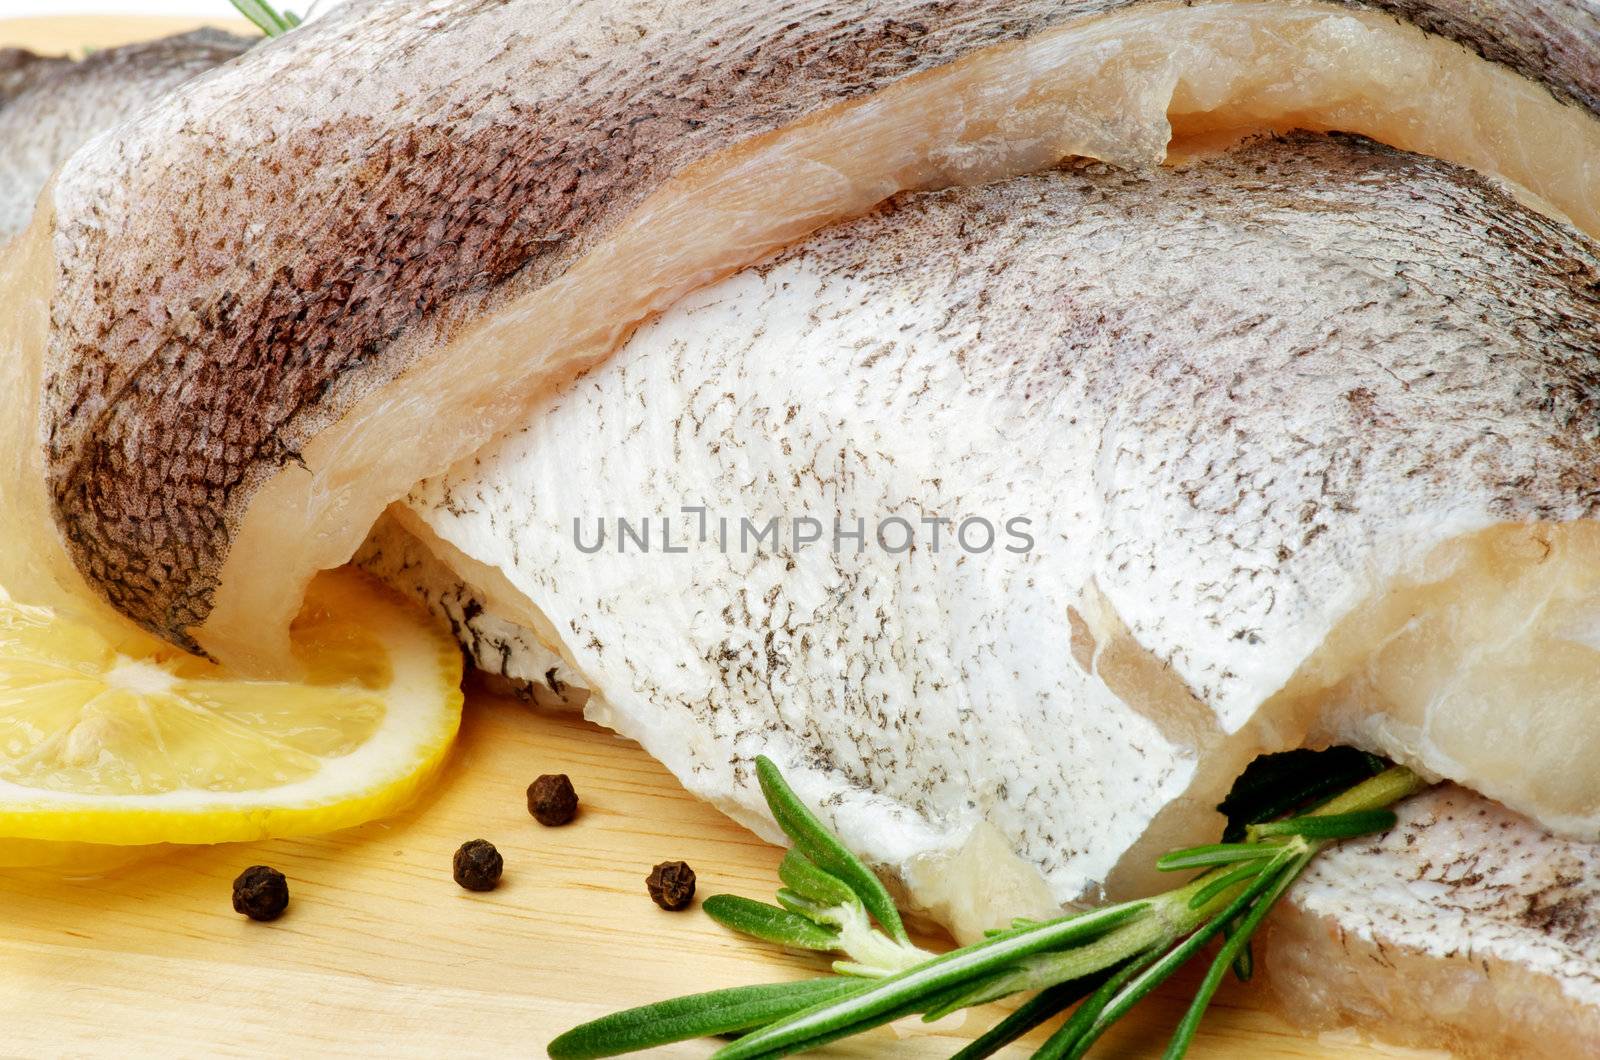 Fillets of Raw Fish Hake with Lemon, Black Peppercorn and Rosemary closeup on Cutting Board